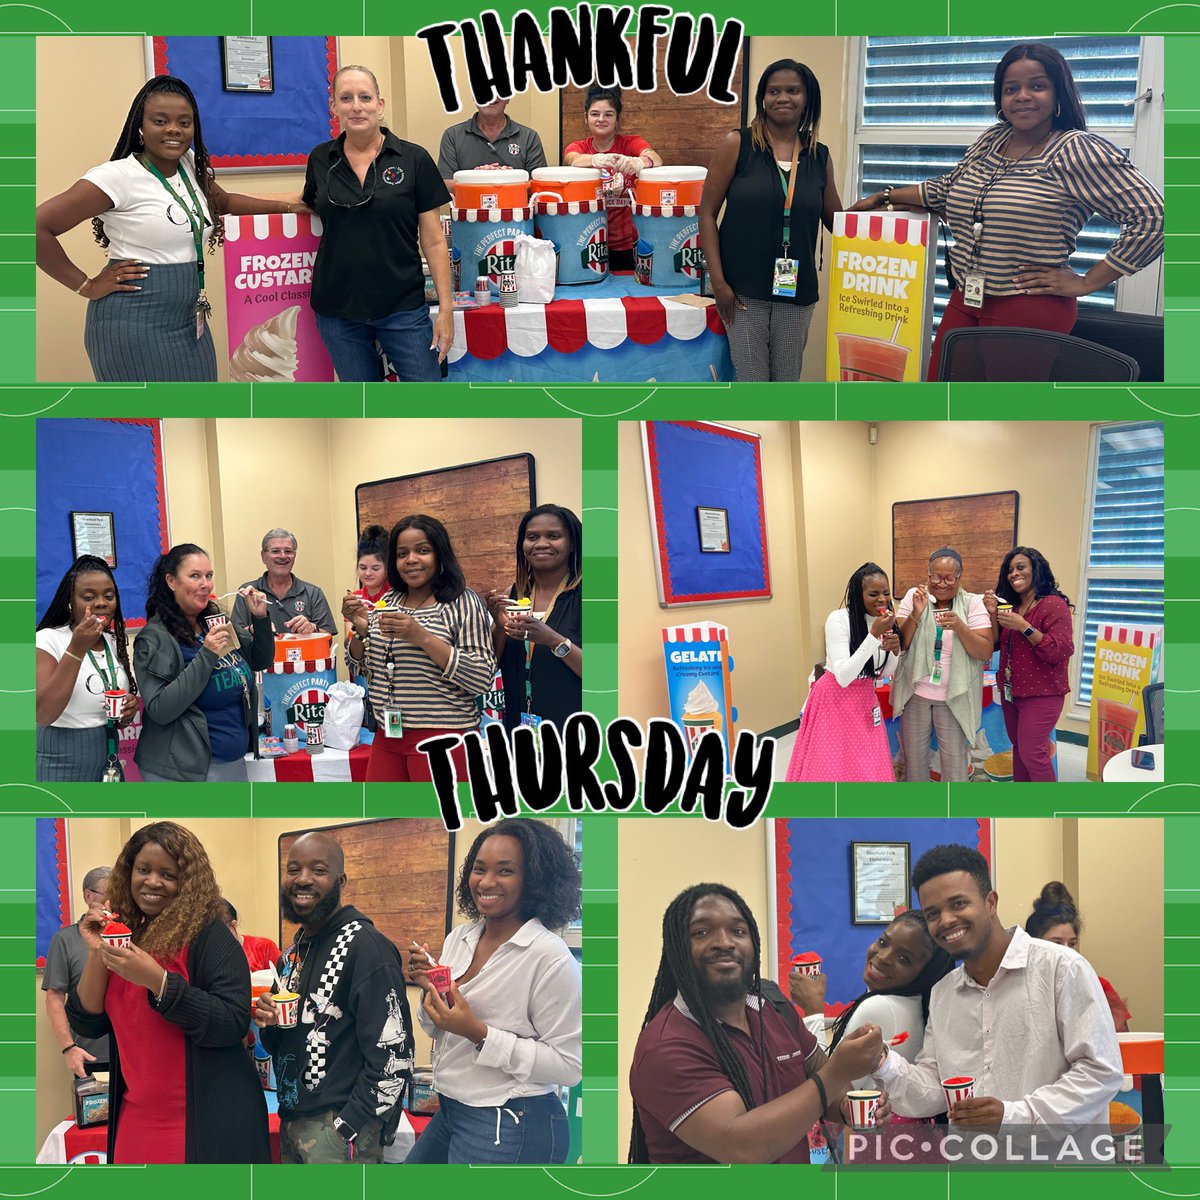 Showing appreciation to our staff on Thankful Thursday. I am honored to lead a phenomenal staff. @MPerezDir @PrincipalDarby1